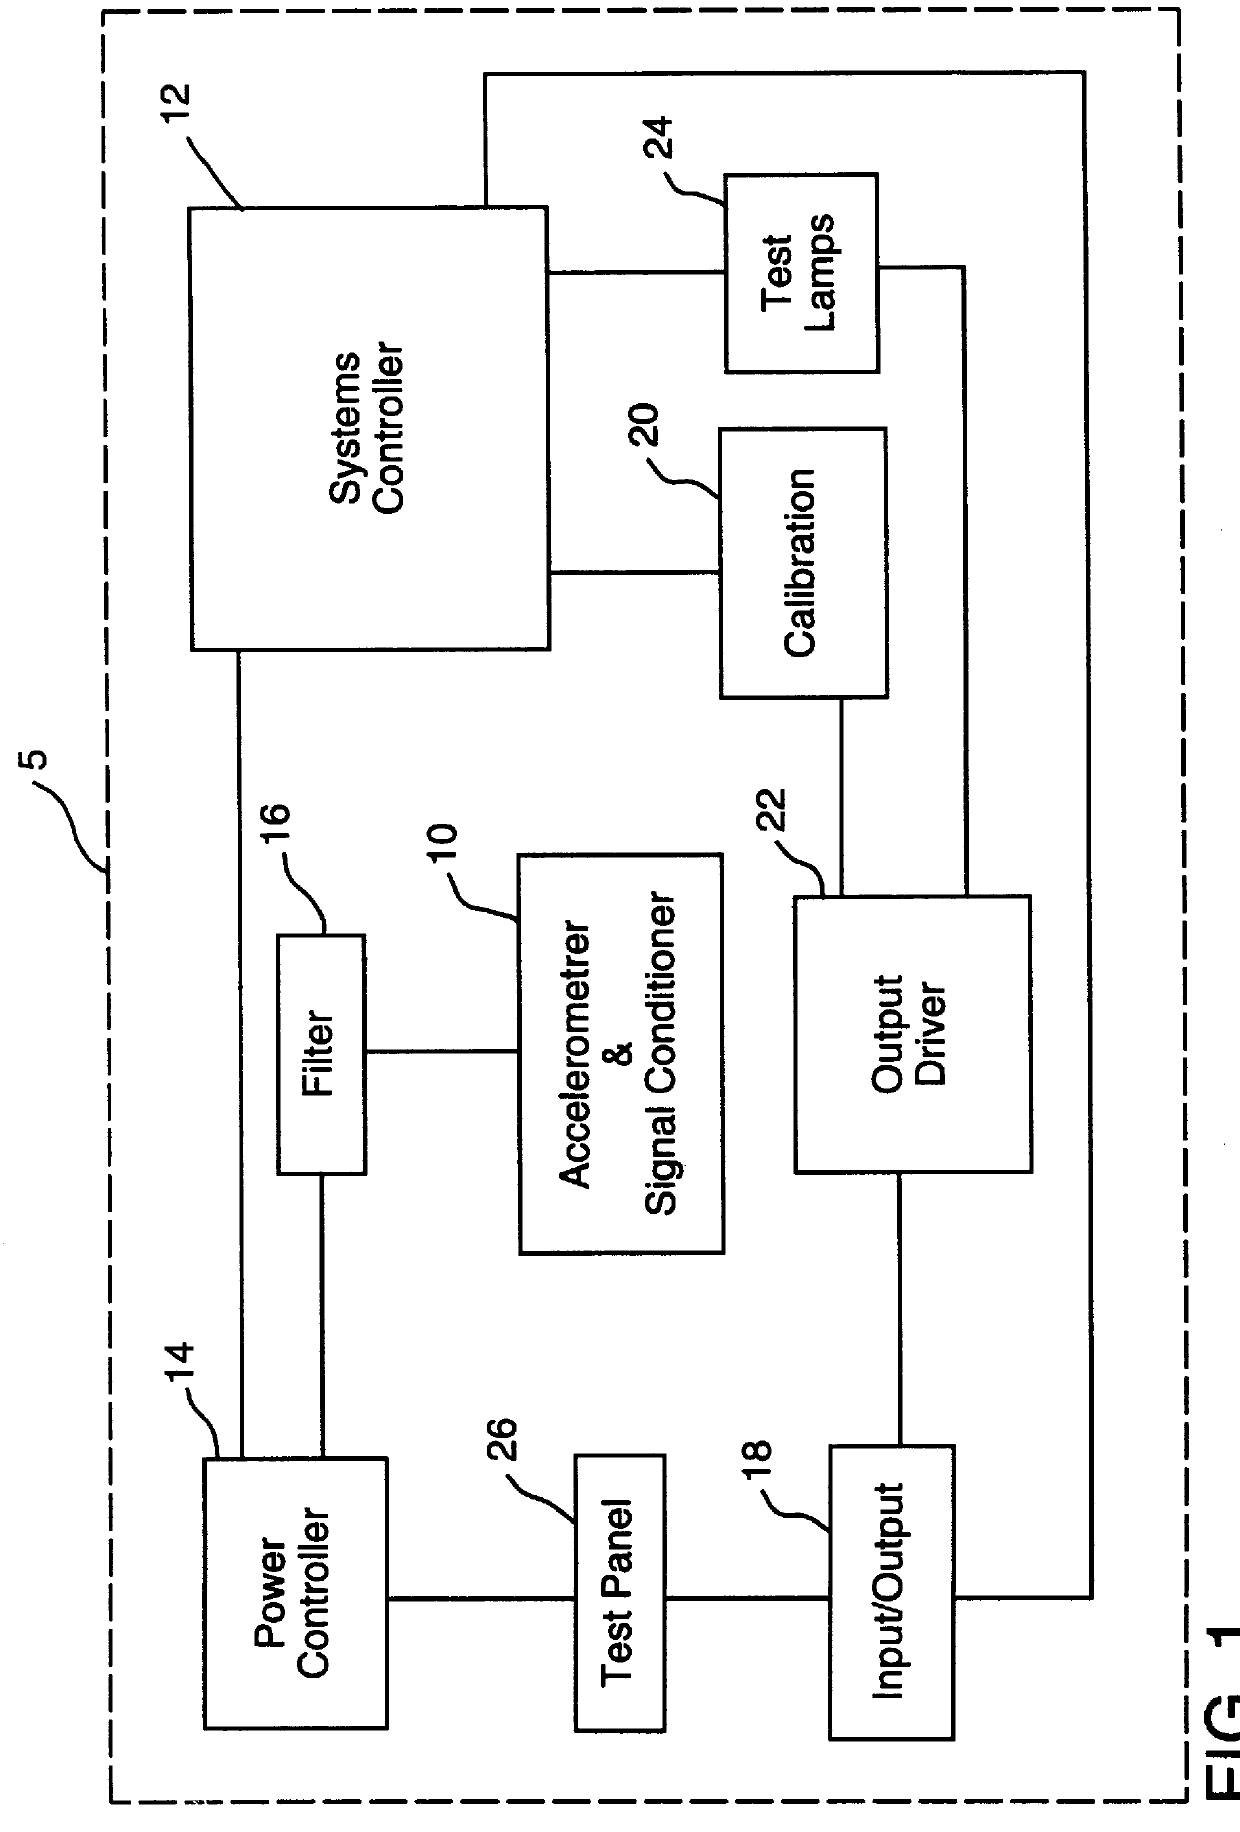 Detector for sensing motion and direction of a railway device